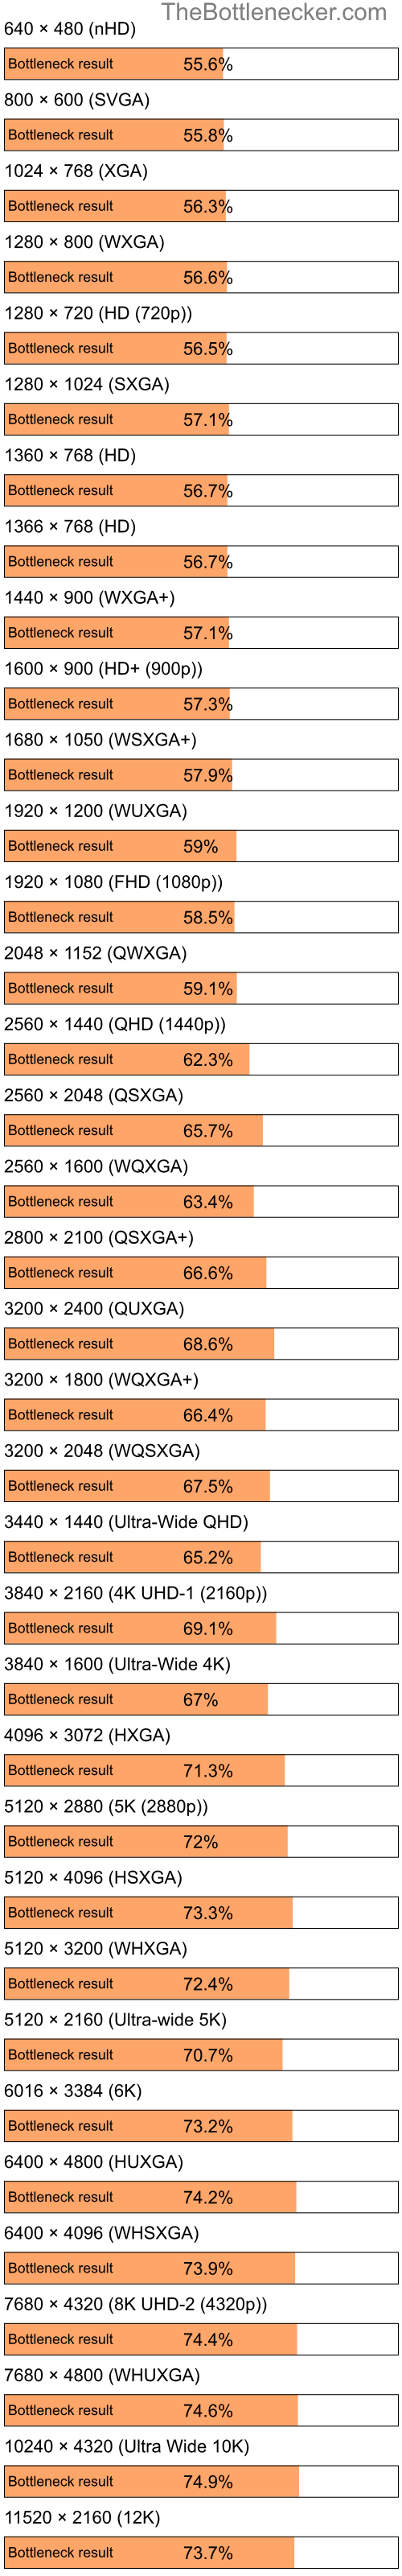 Bottleneck results by resolution for AMD Ryzen Threadripper PRO 7985WX and NVIDIA GeForce GTX 1650 in Graphic Card Intense Tasks